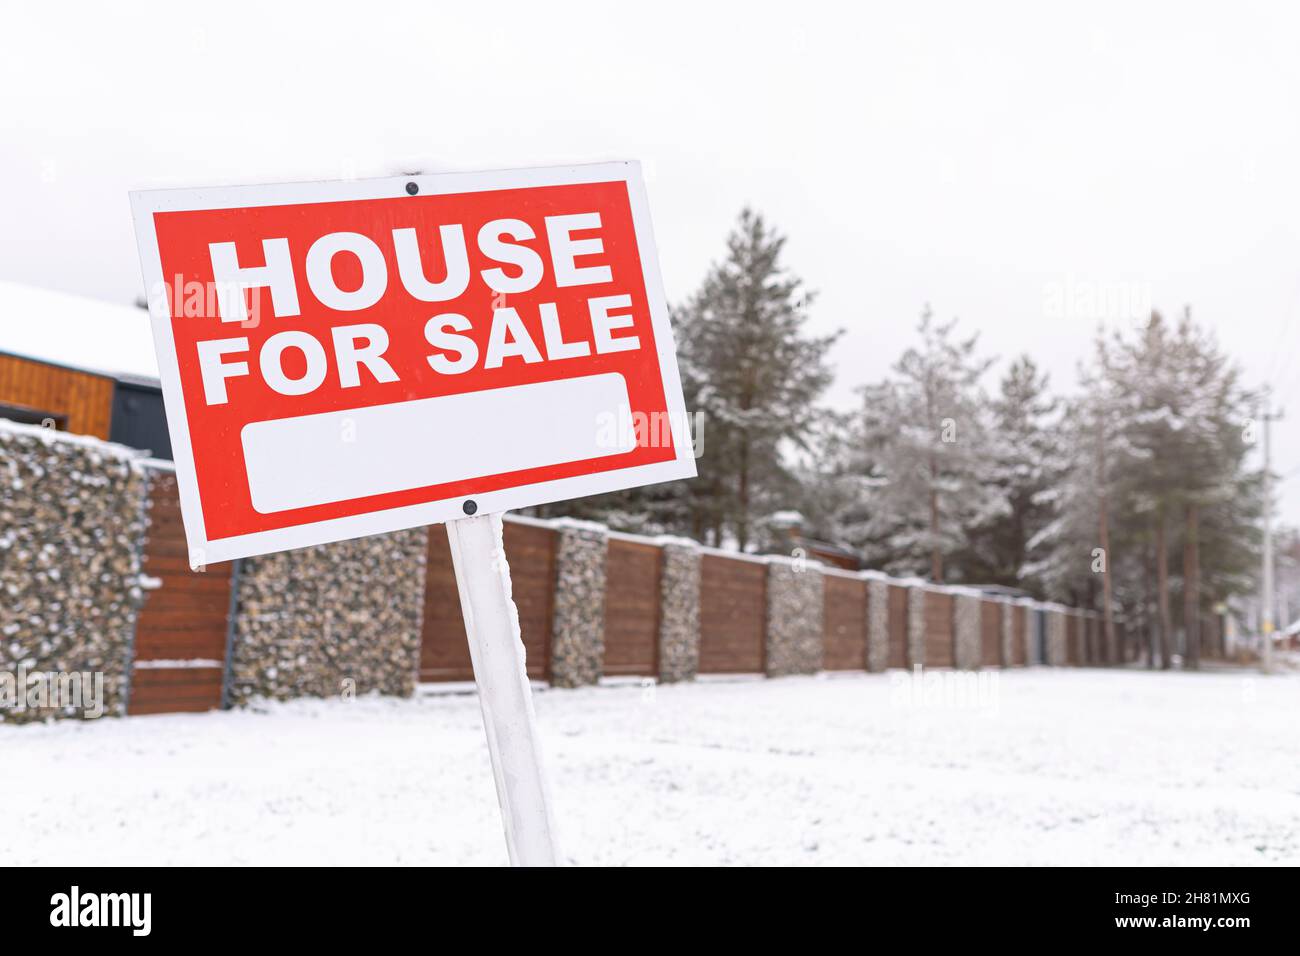 Red sign - house for sale, outdoors in winter against the backdrop of a fence and snowy pine trees. Buying suburban real estate with a mortgage. Sale Stock Photo